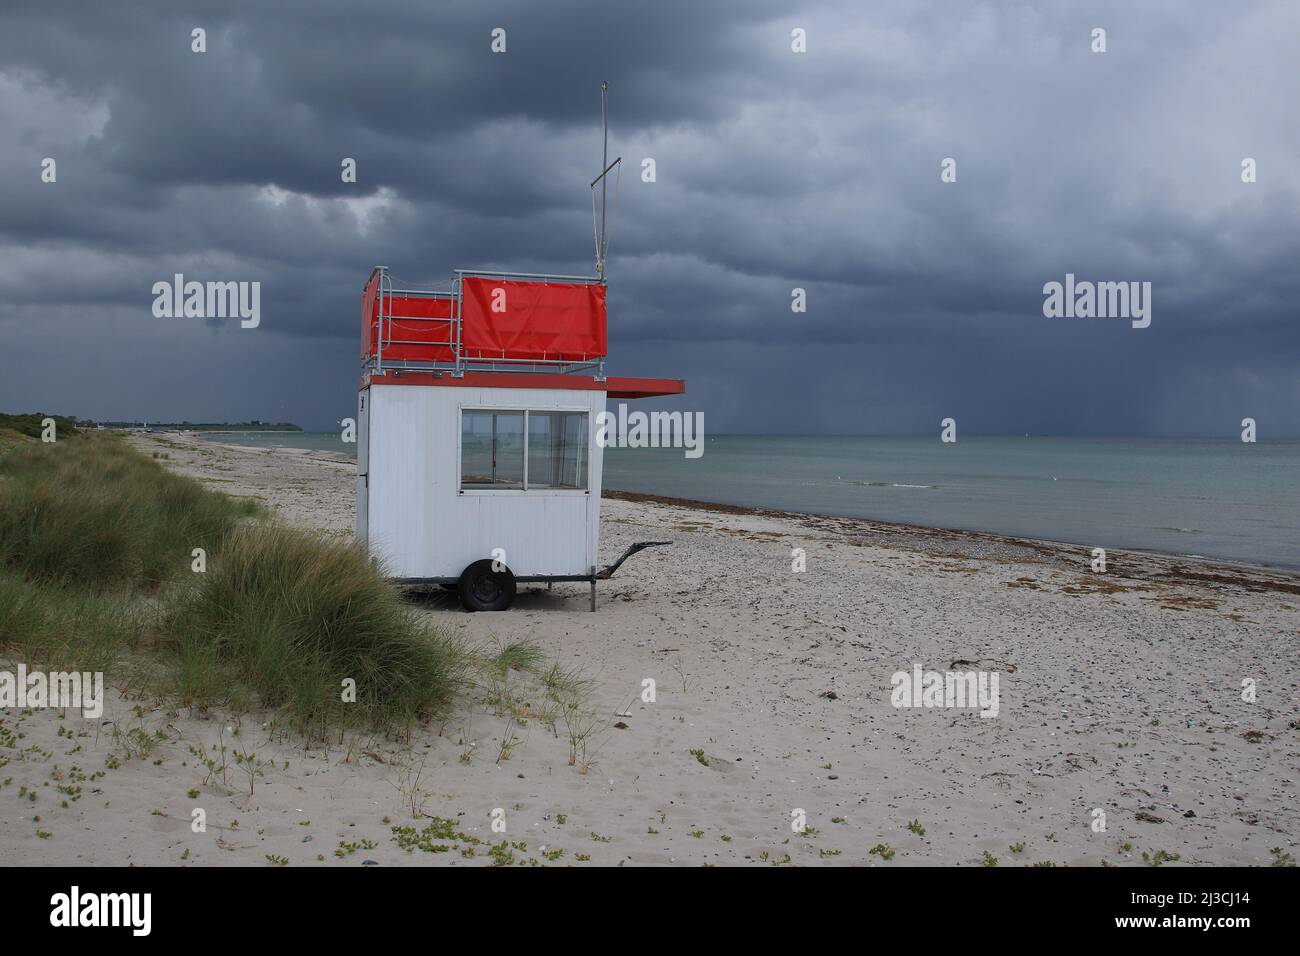 The lookout car of the water rescue service stands alone on the Baltic Sea beach,over which threatening, dark thunderstorm clouds are gathering. Stock Photo